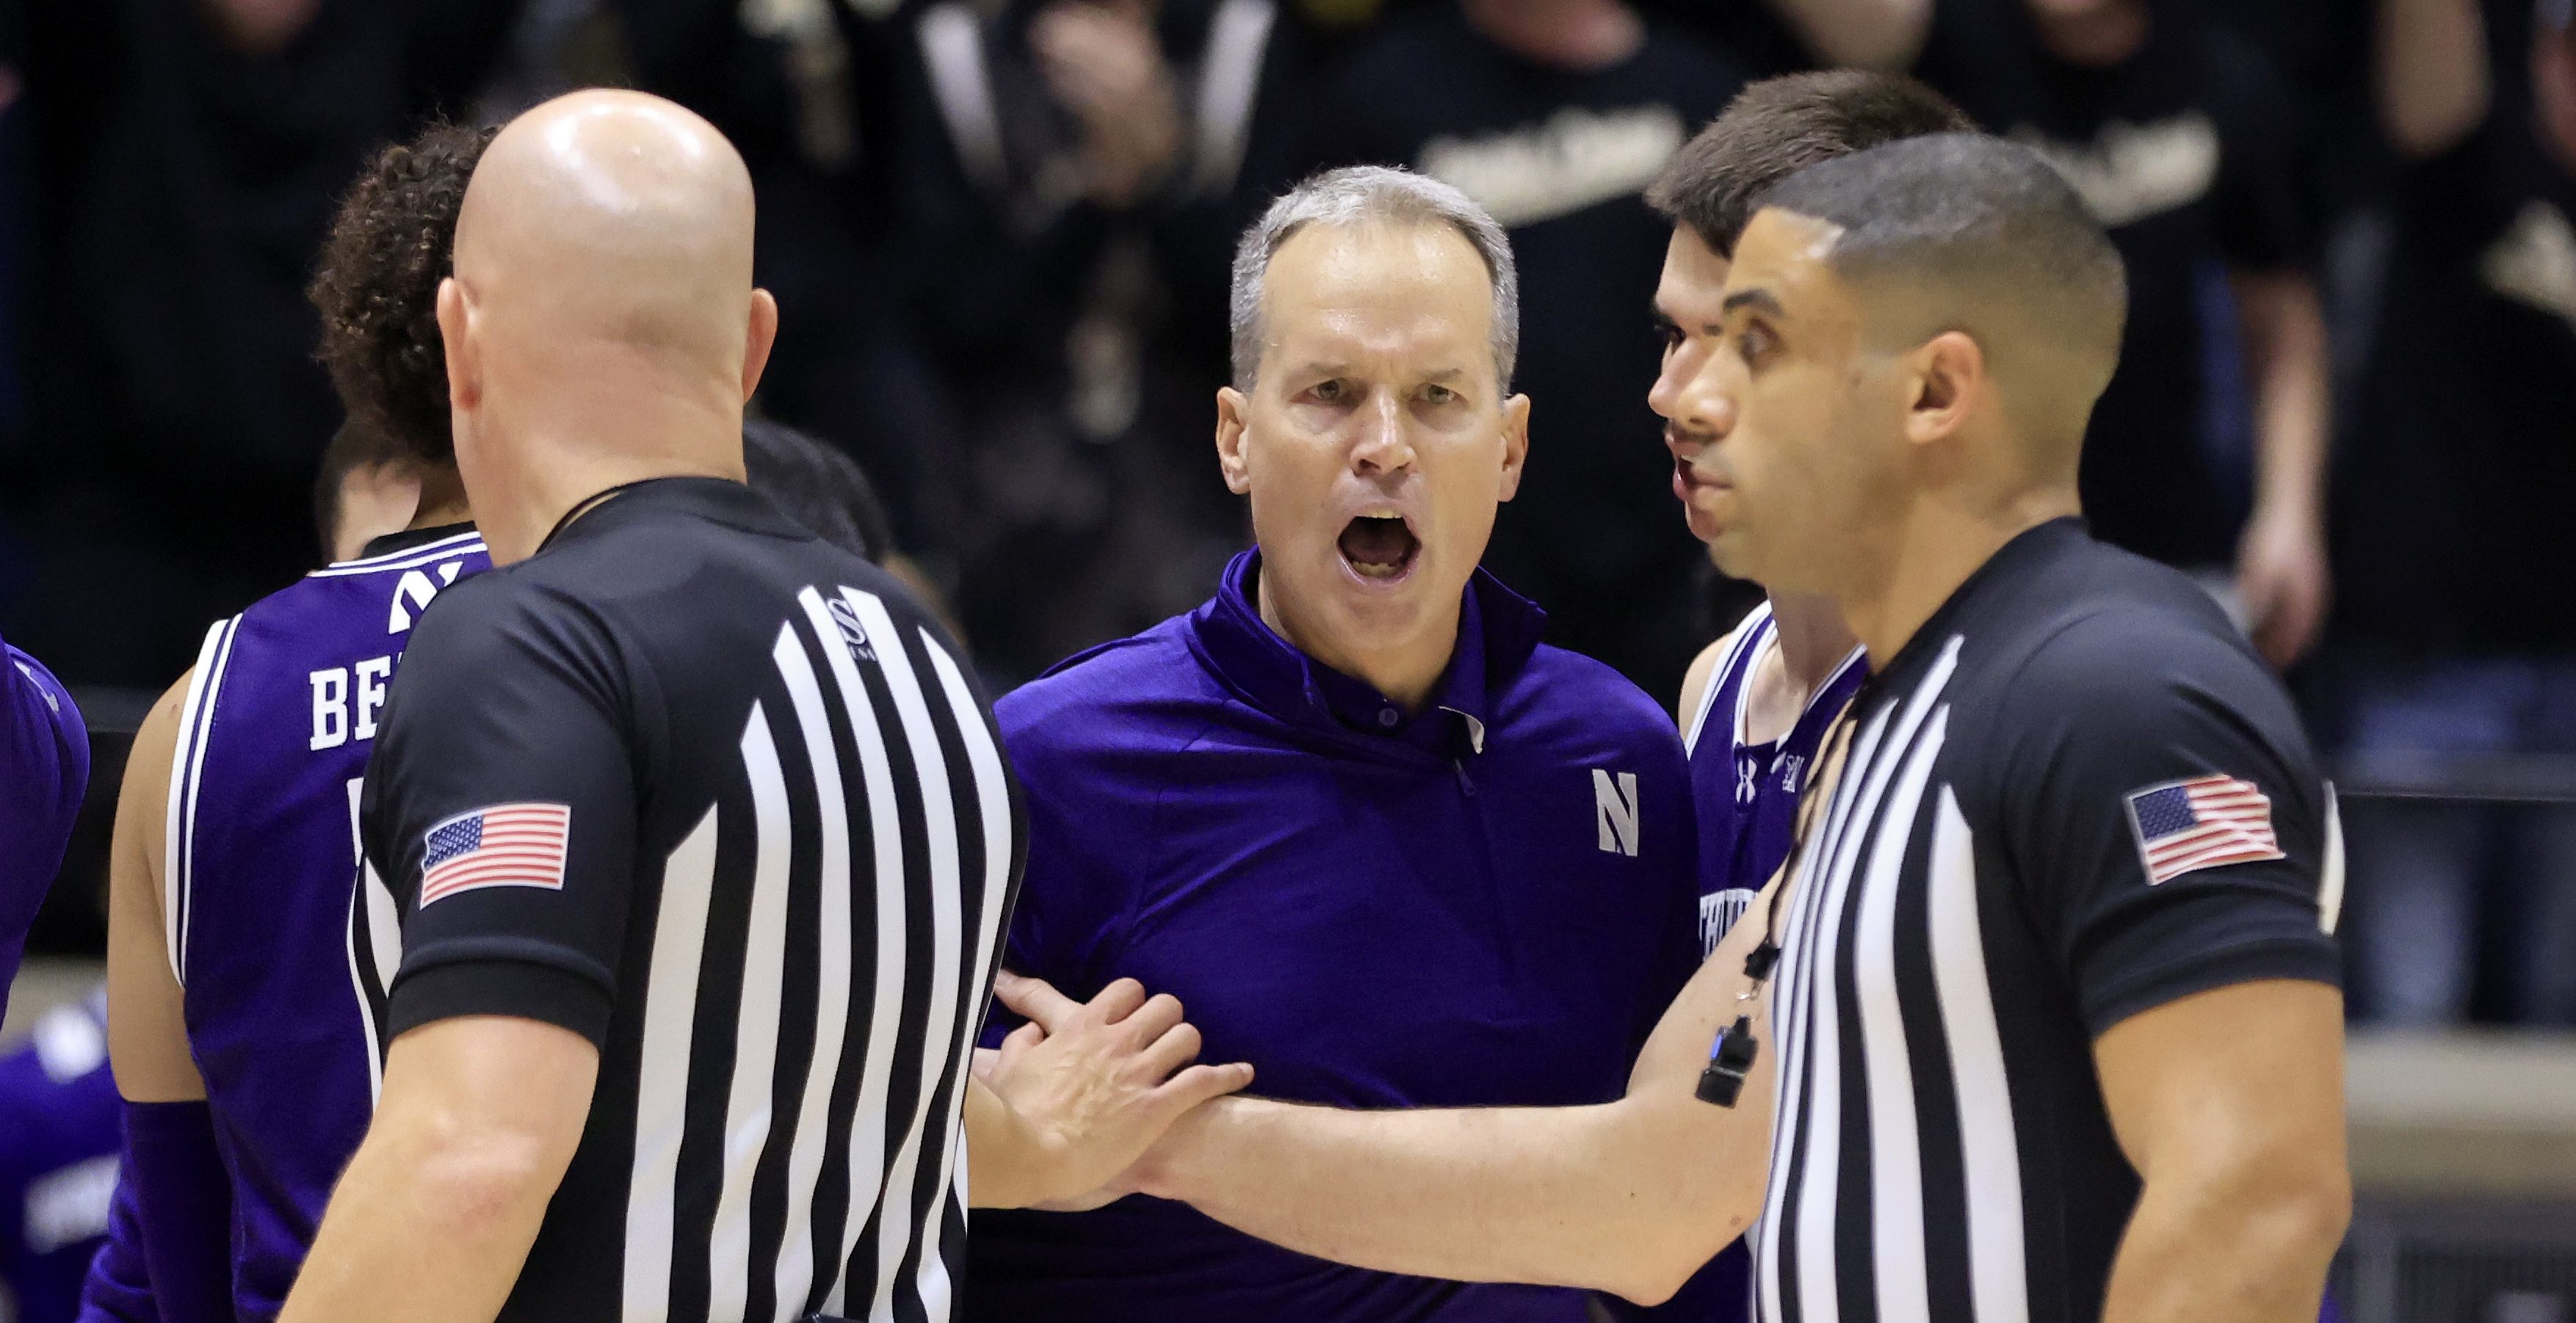 WEST LAFAYETTE, INDIANA - JANUARY 31: Head coach Chris Collins of the Northwestern Wildcats reacts after receiving a technical foul during the second half against the Purdue Boilermakers at Mackey Arena on January 31, 2024 in West Lafayette, Indiana.